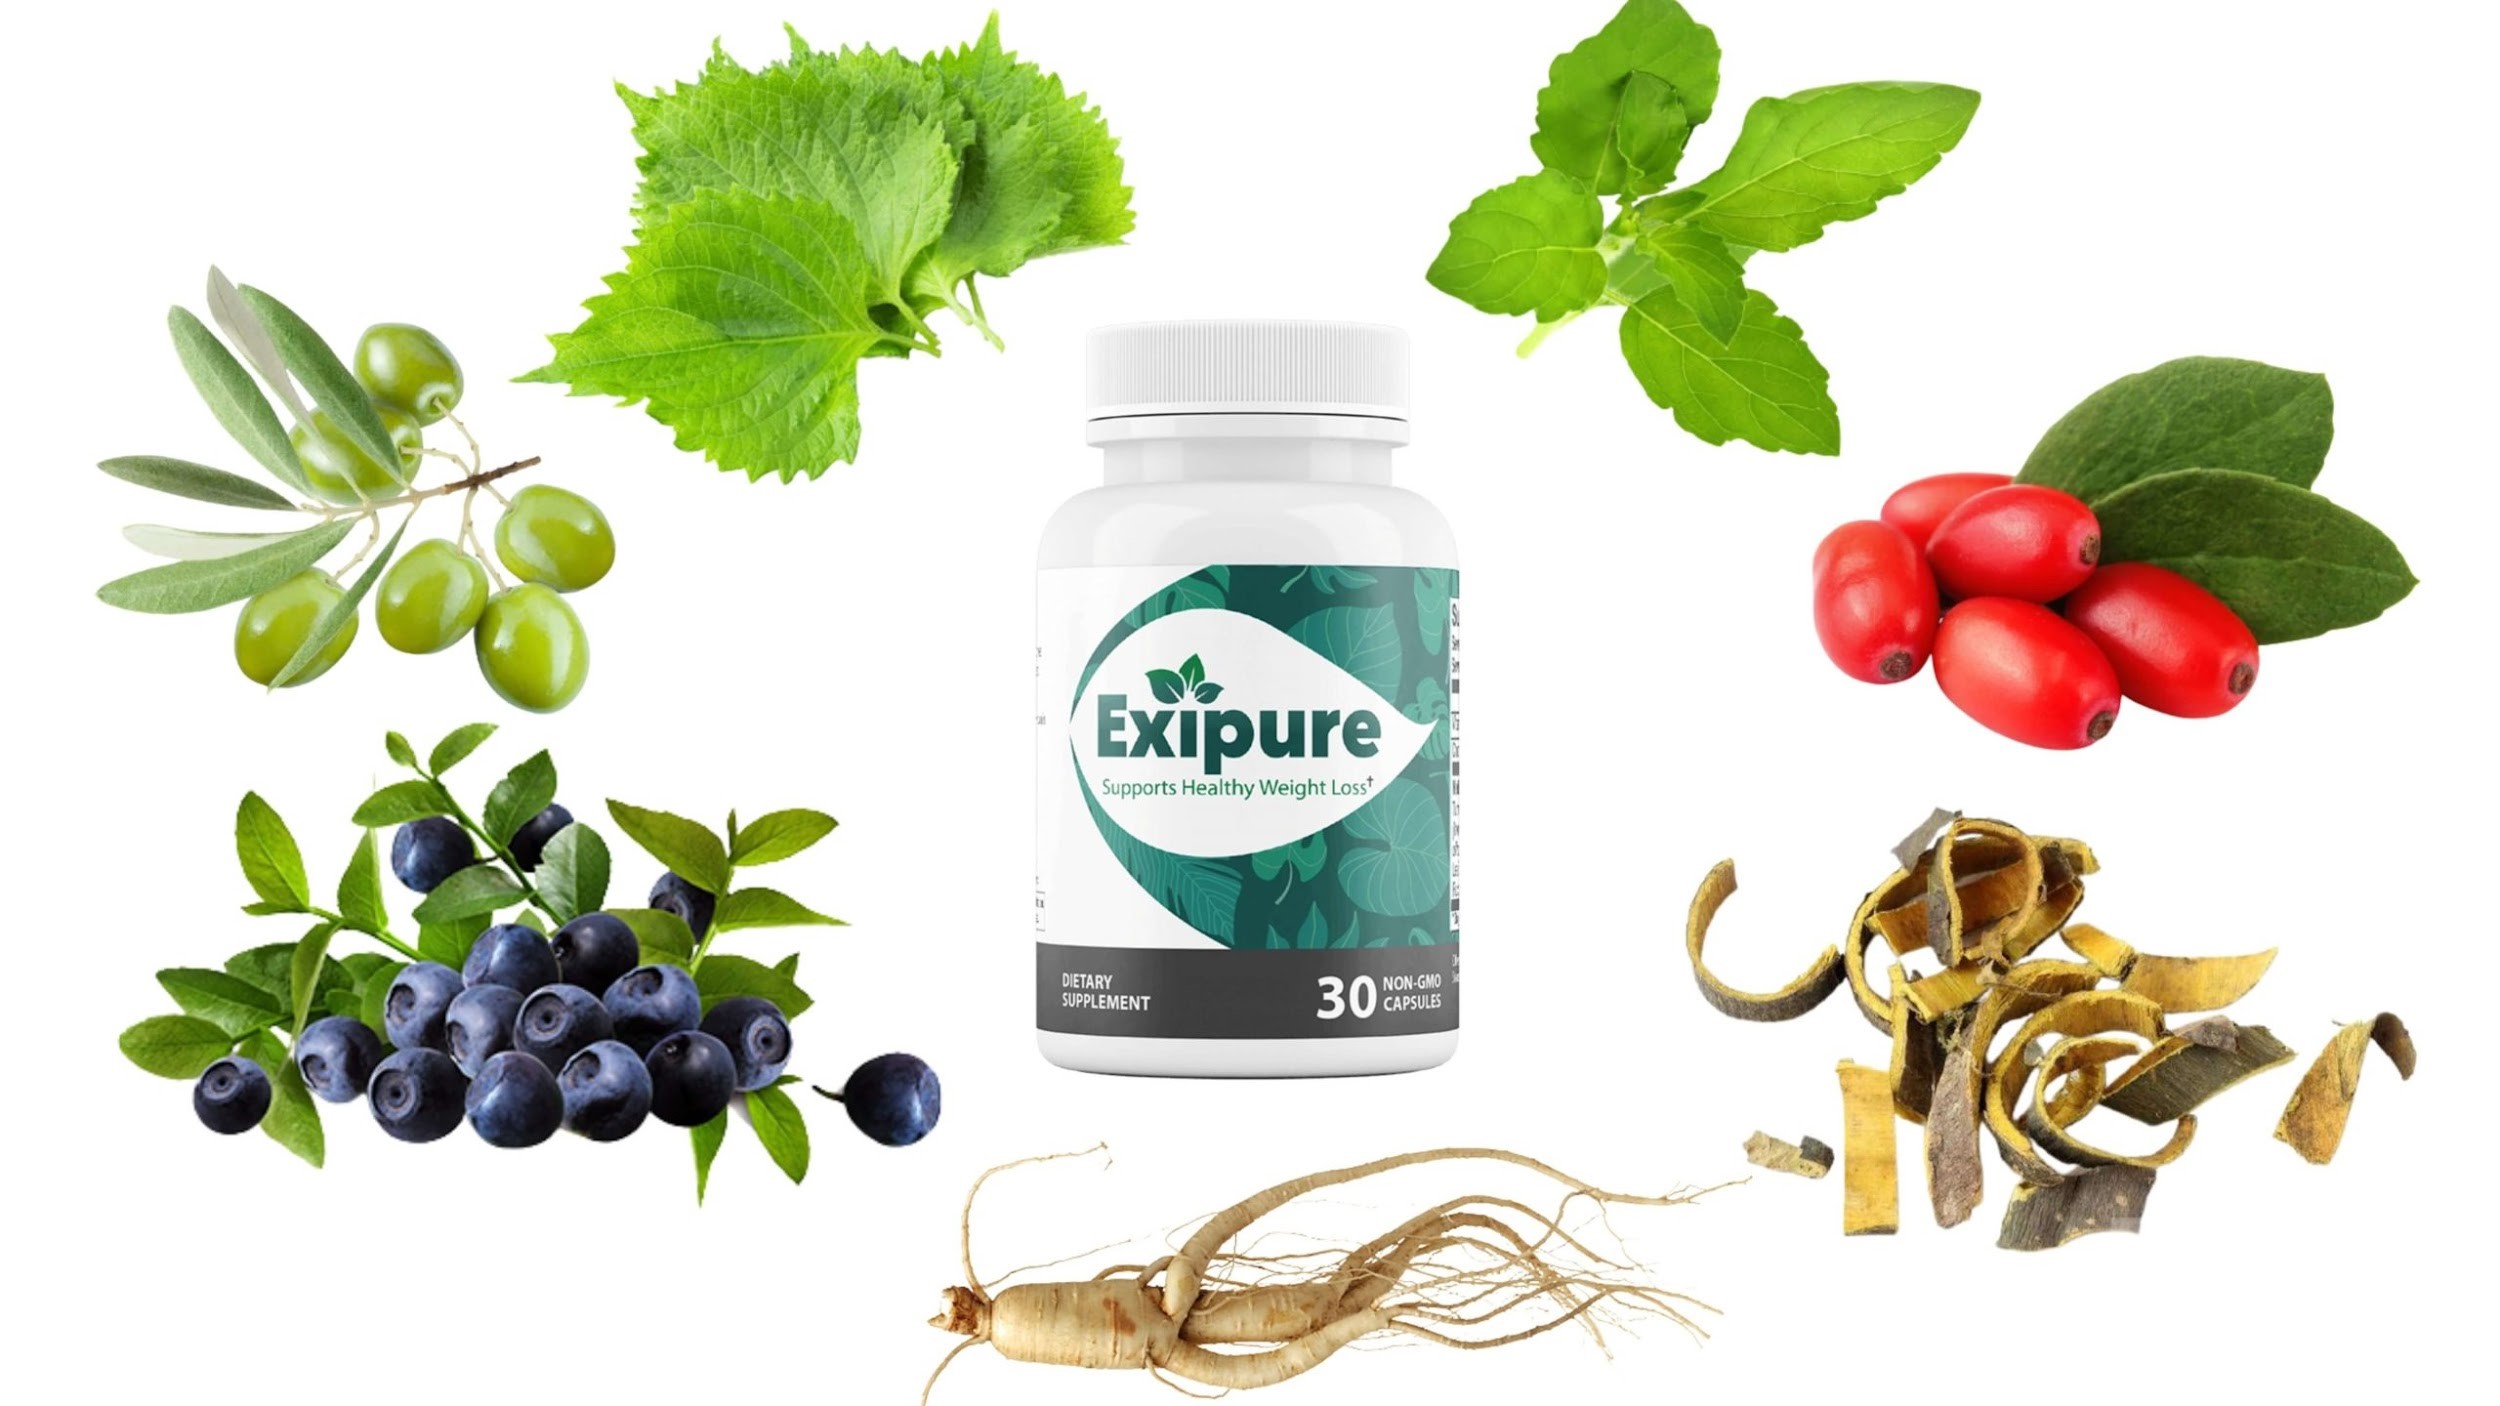 Exipure Supplement Facts